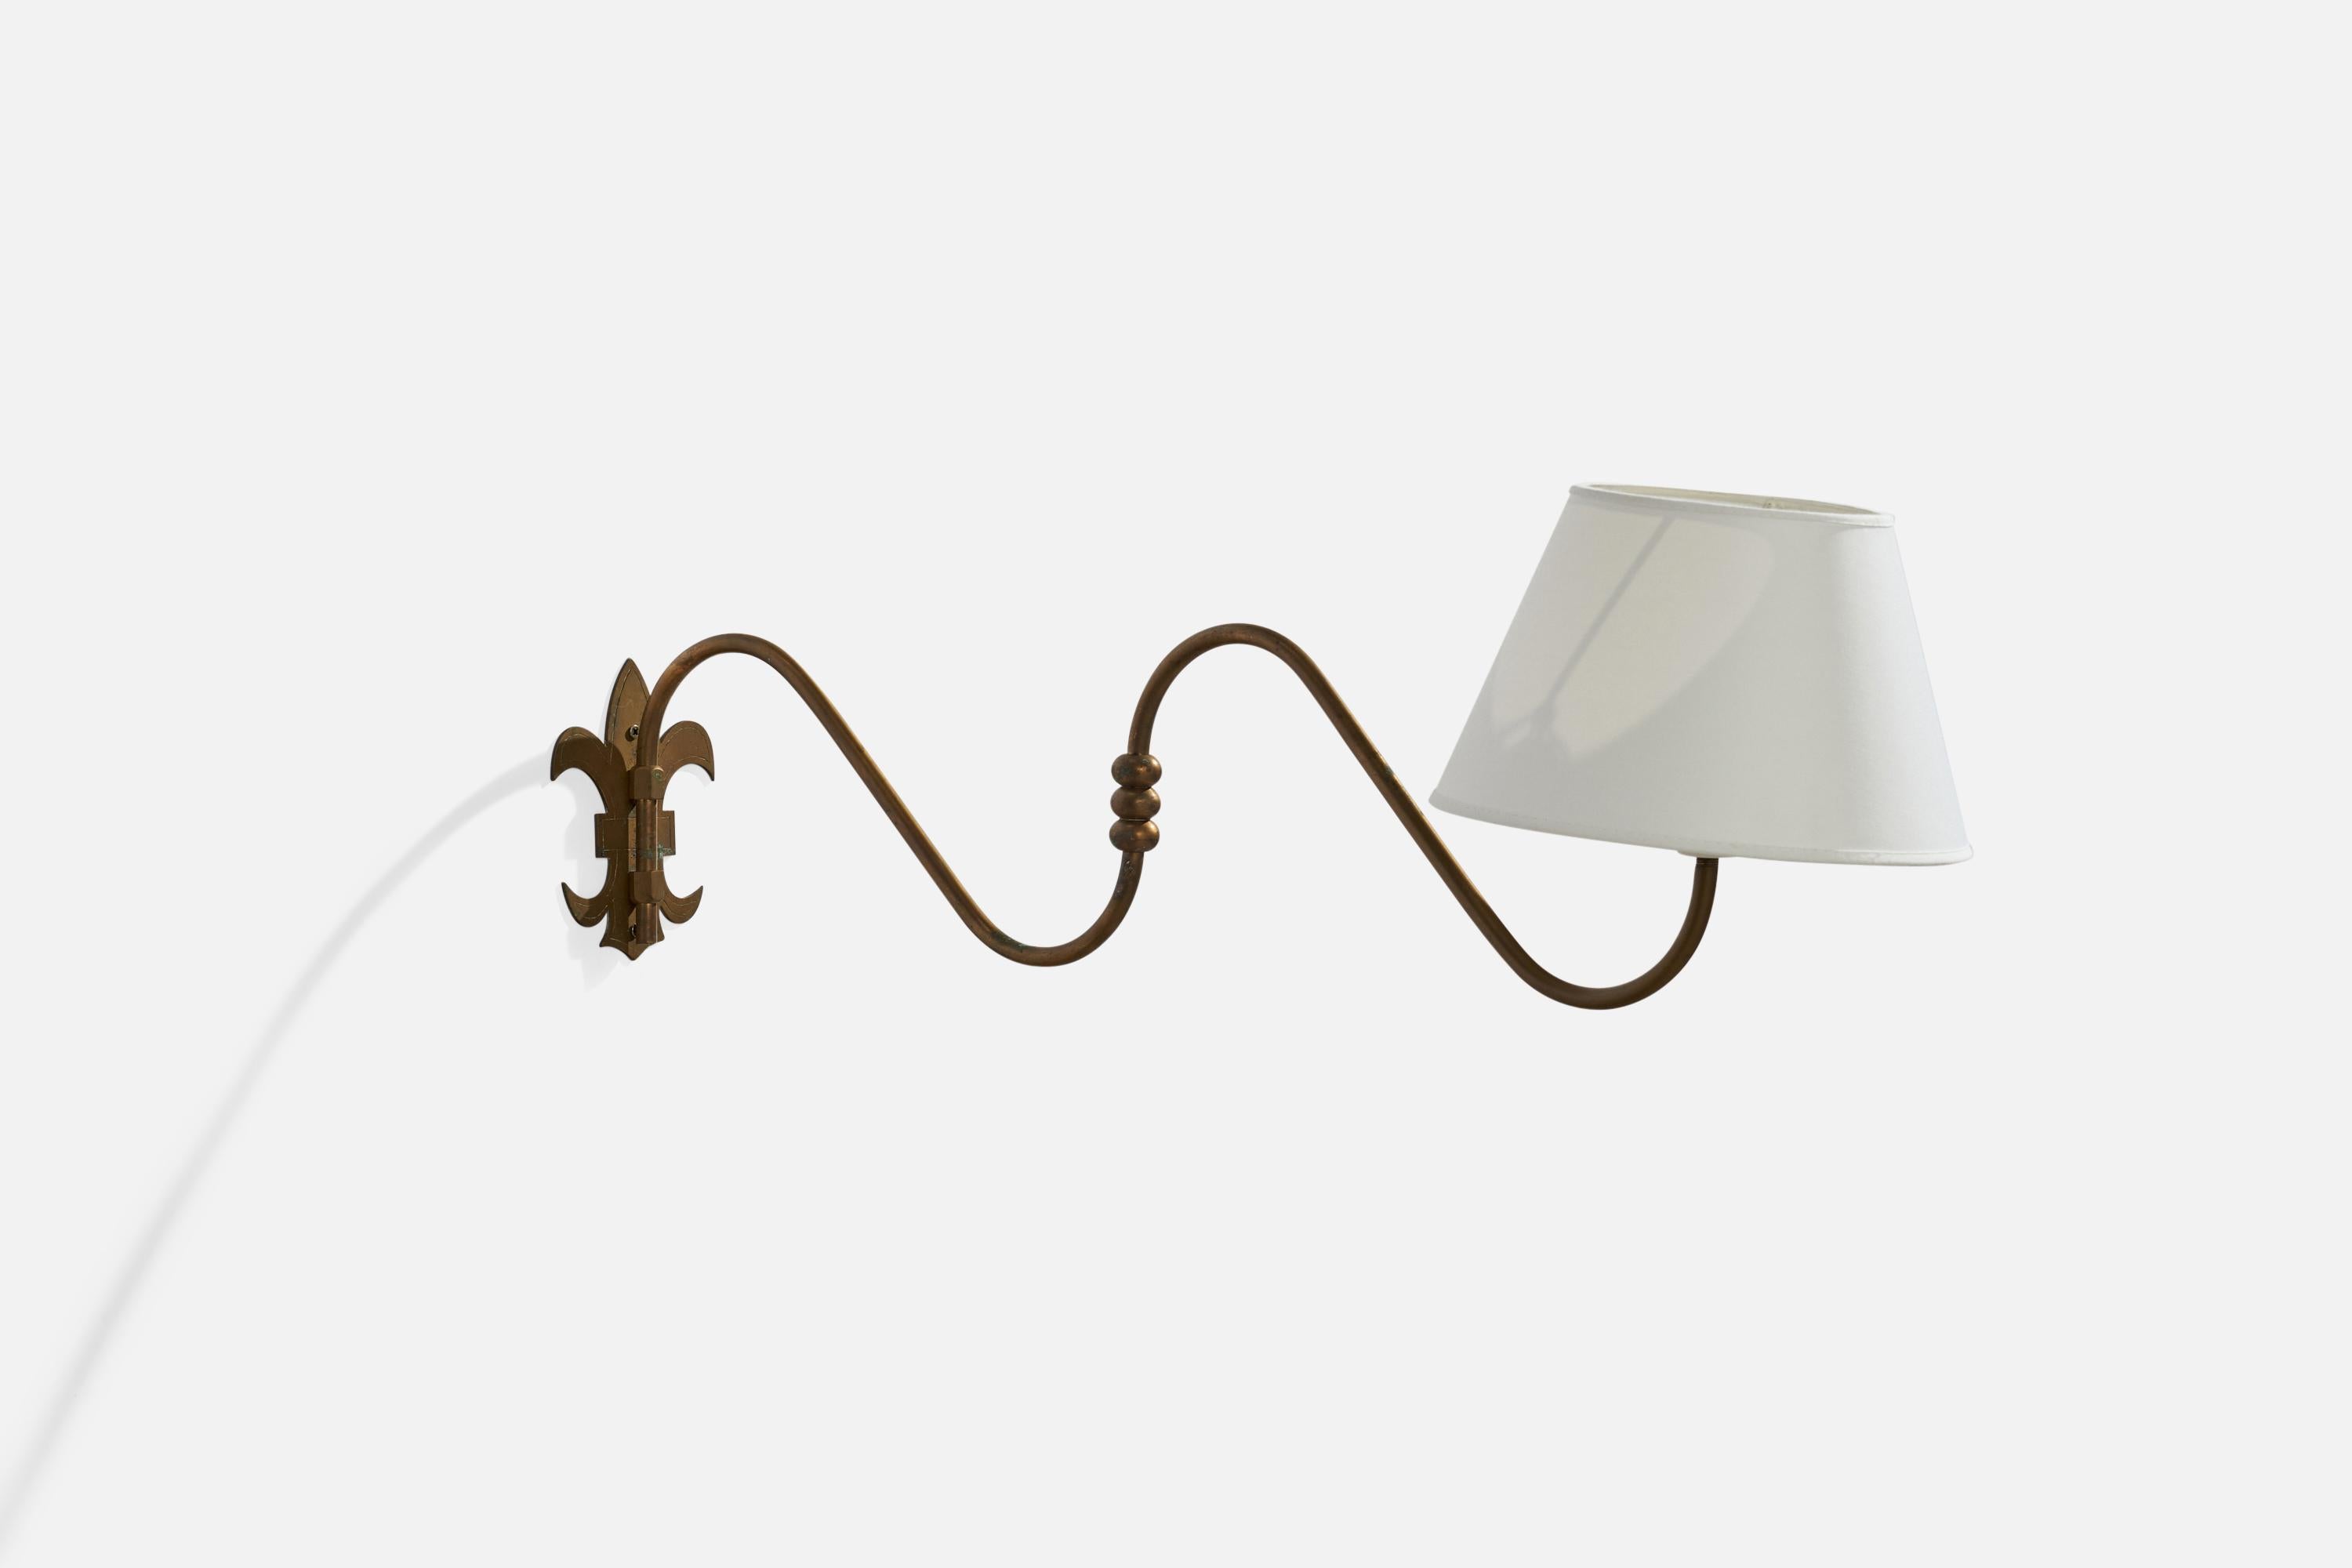 An adjustable brass and white fabric wall light designed and produced in Denmark, 1930s.

Dimensions variable.
Overall Dimensions (inches): 7”  H x 11.5” W x 22.5” D
Back Plate Dimensions (inches): 5.25”  H x 4.25”  W x .25” D
Bulb Specifications: